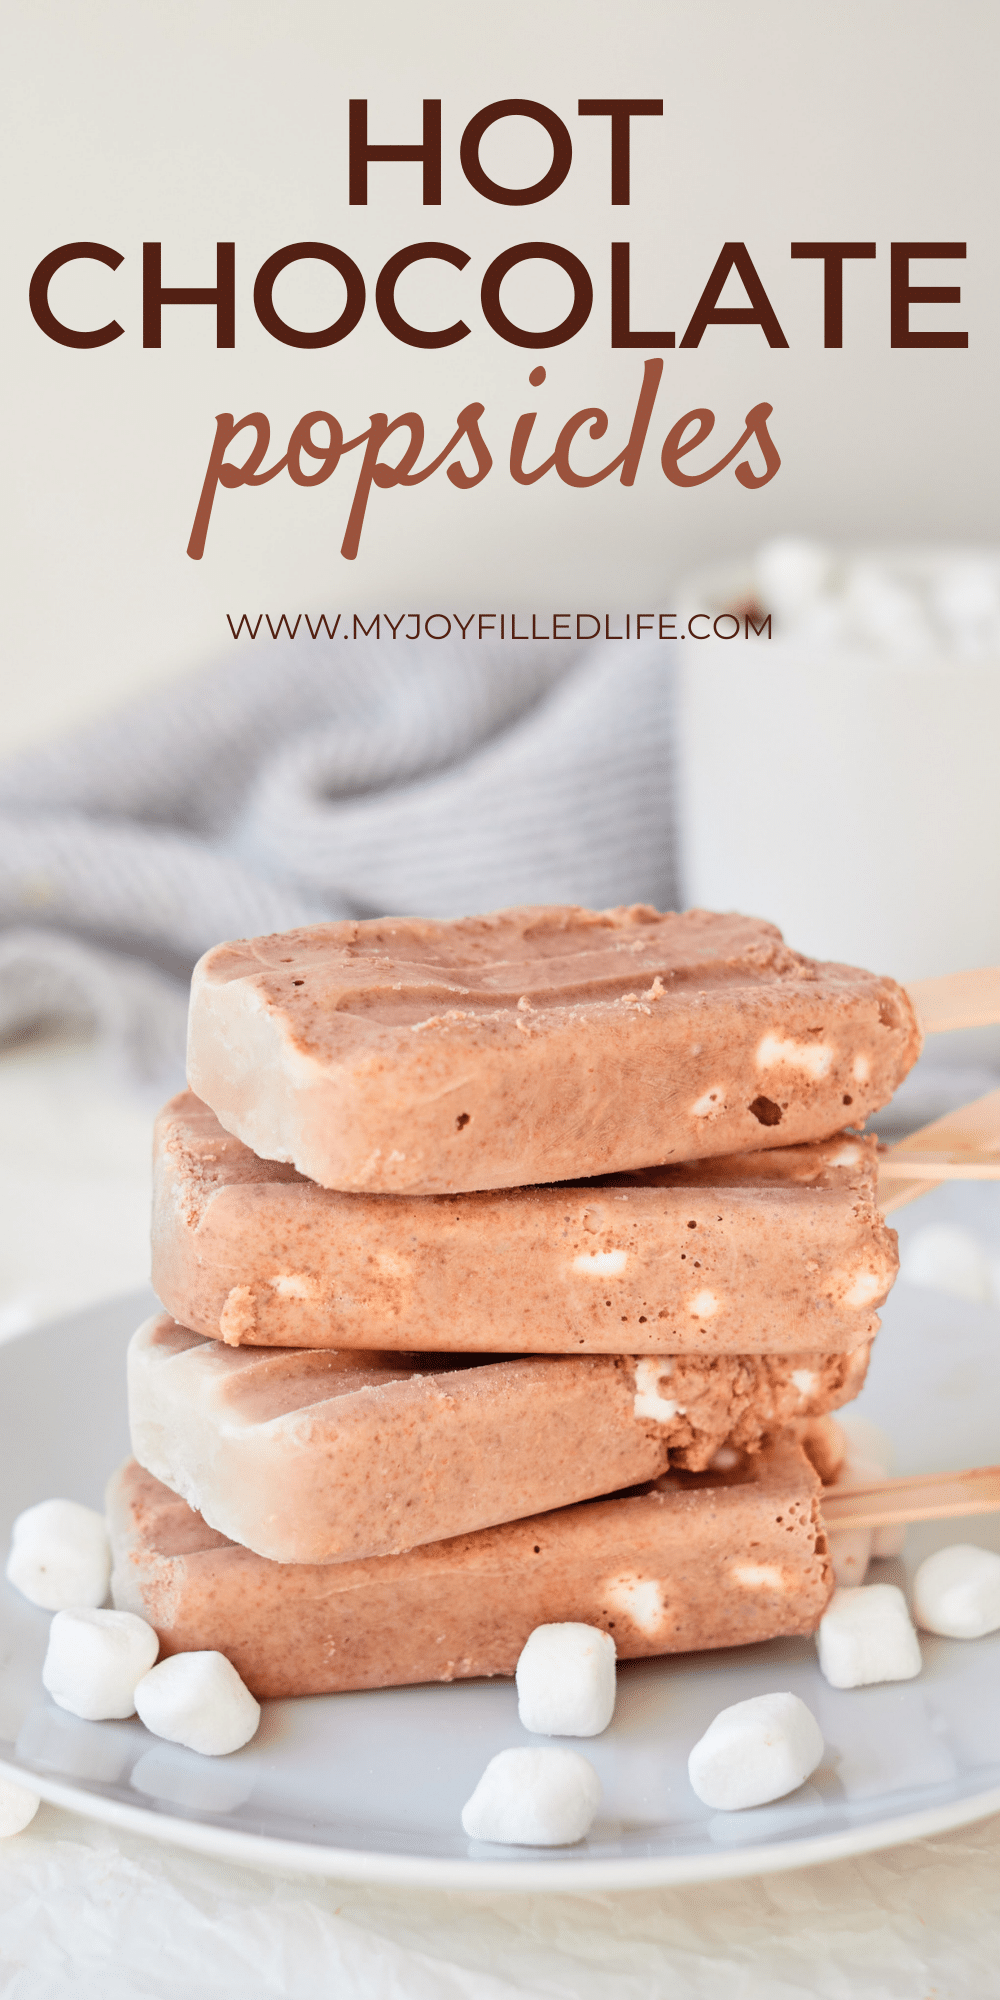 Hot Chocolate Popsicles on a plate